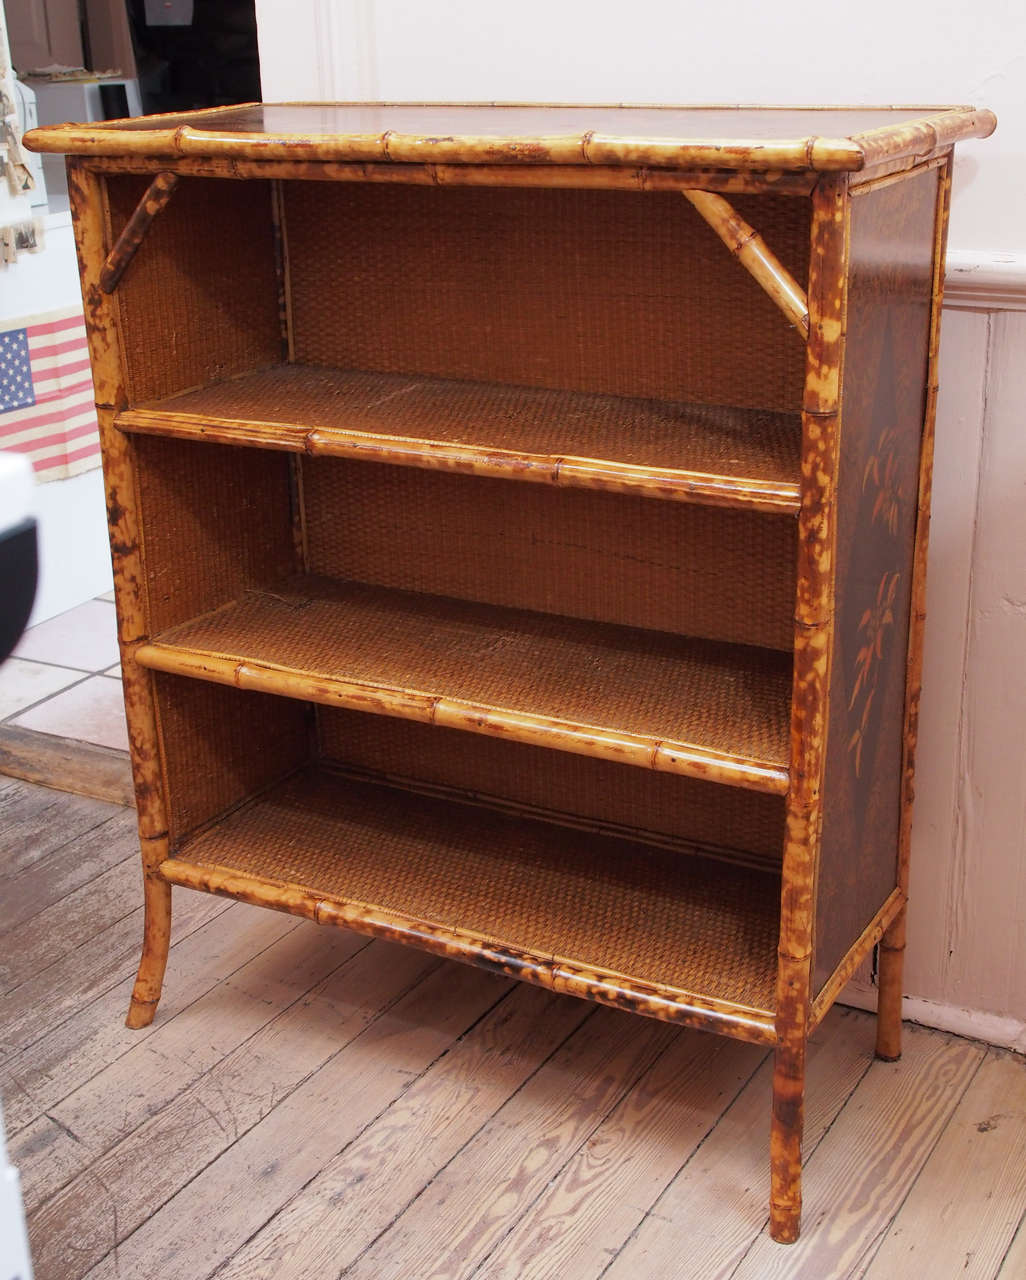 The frame of this vintage bookcase consist of bamboo with painted birds and leaves in a chinoisserie style on both the top as well as the sides.